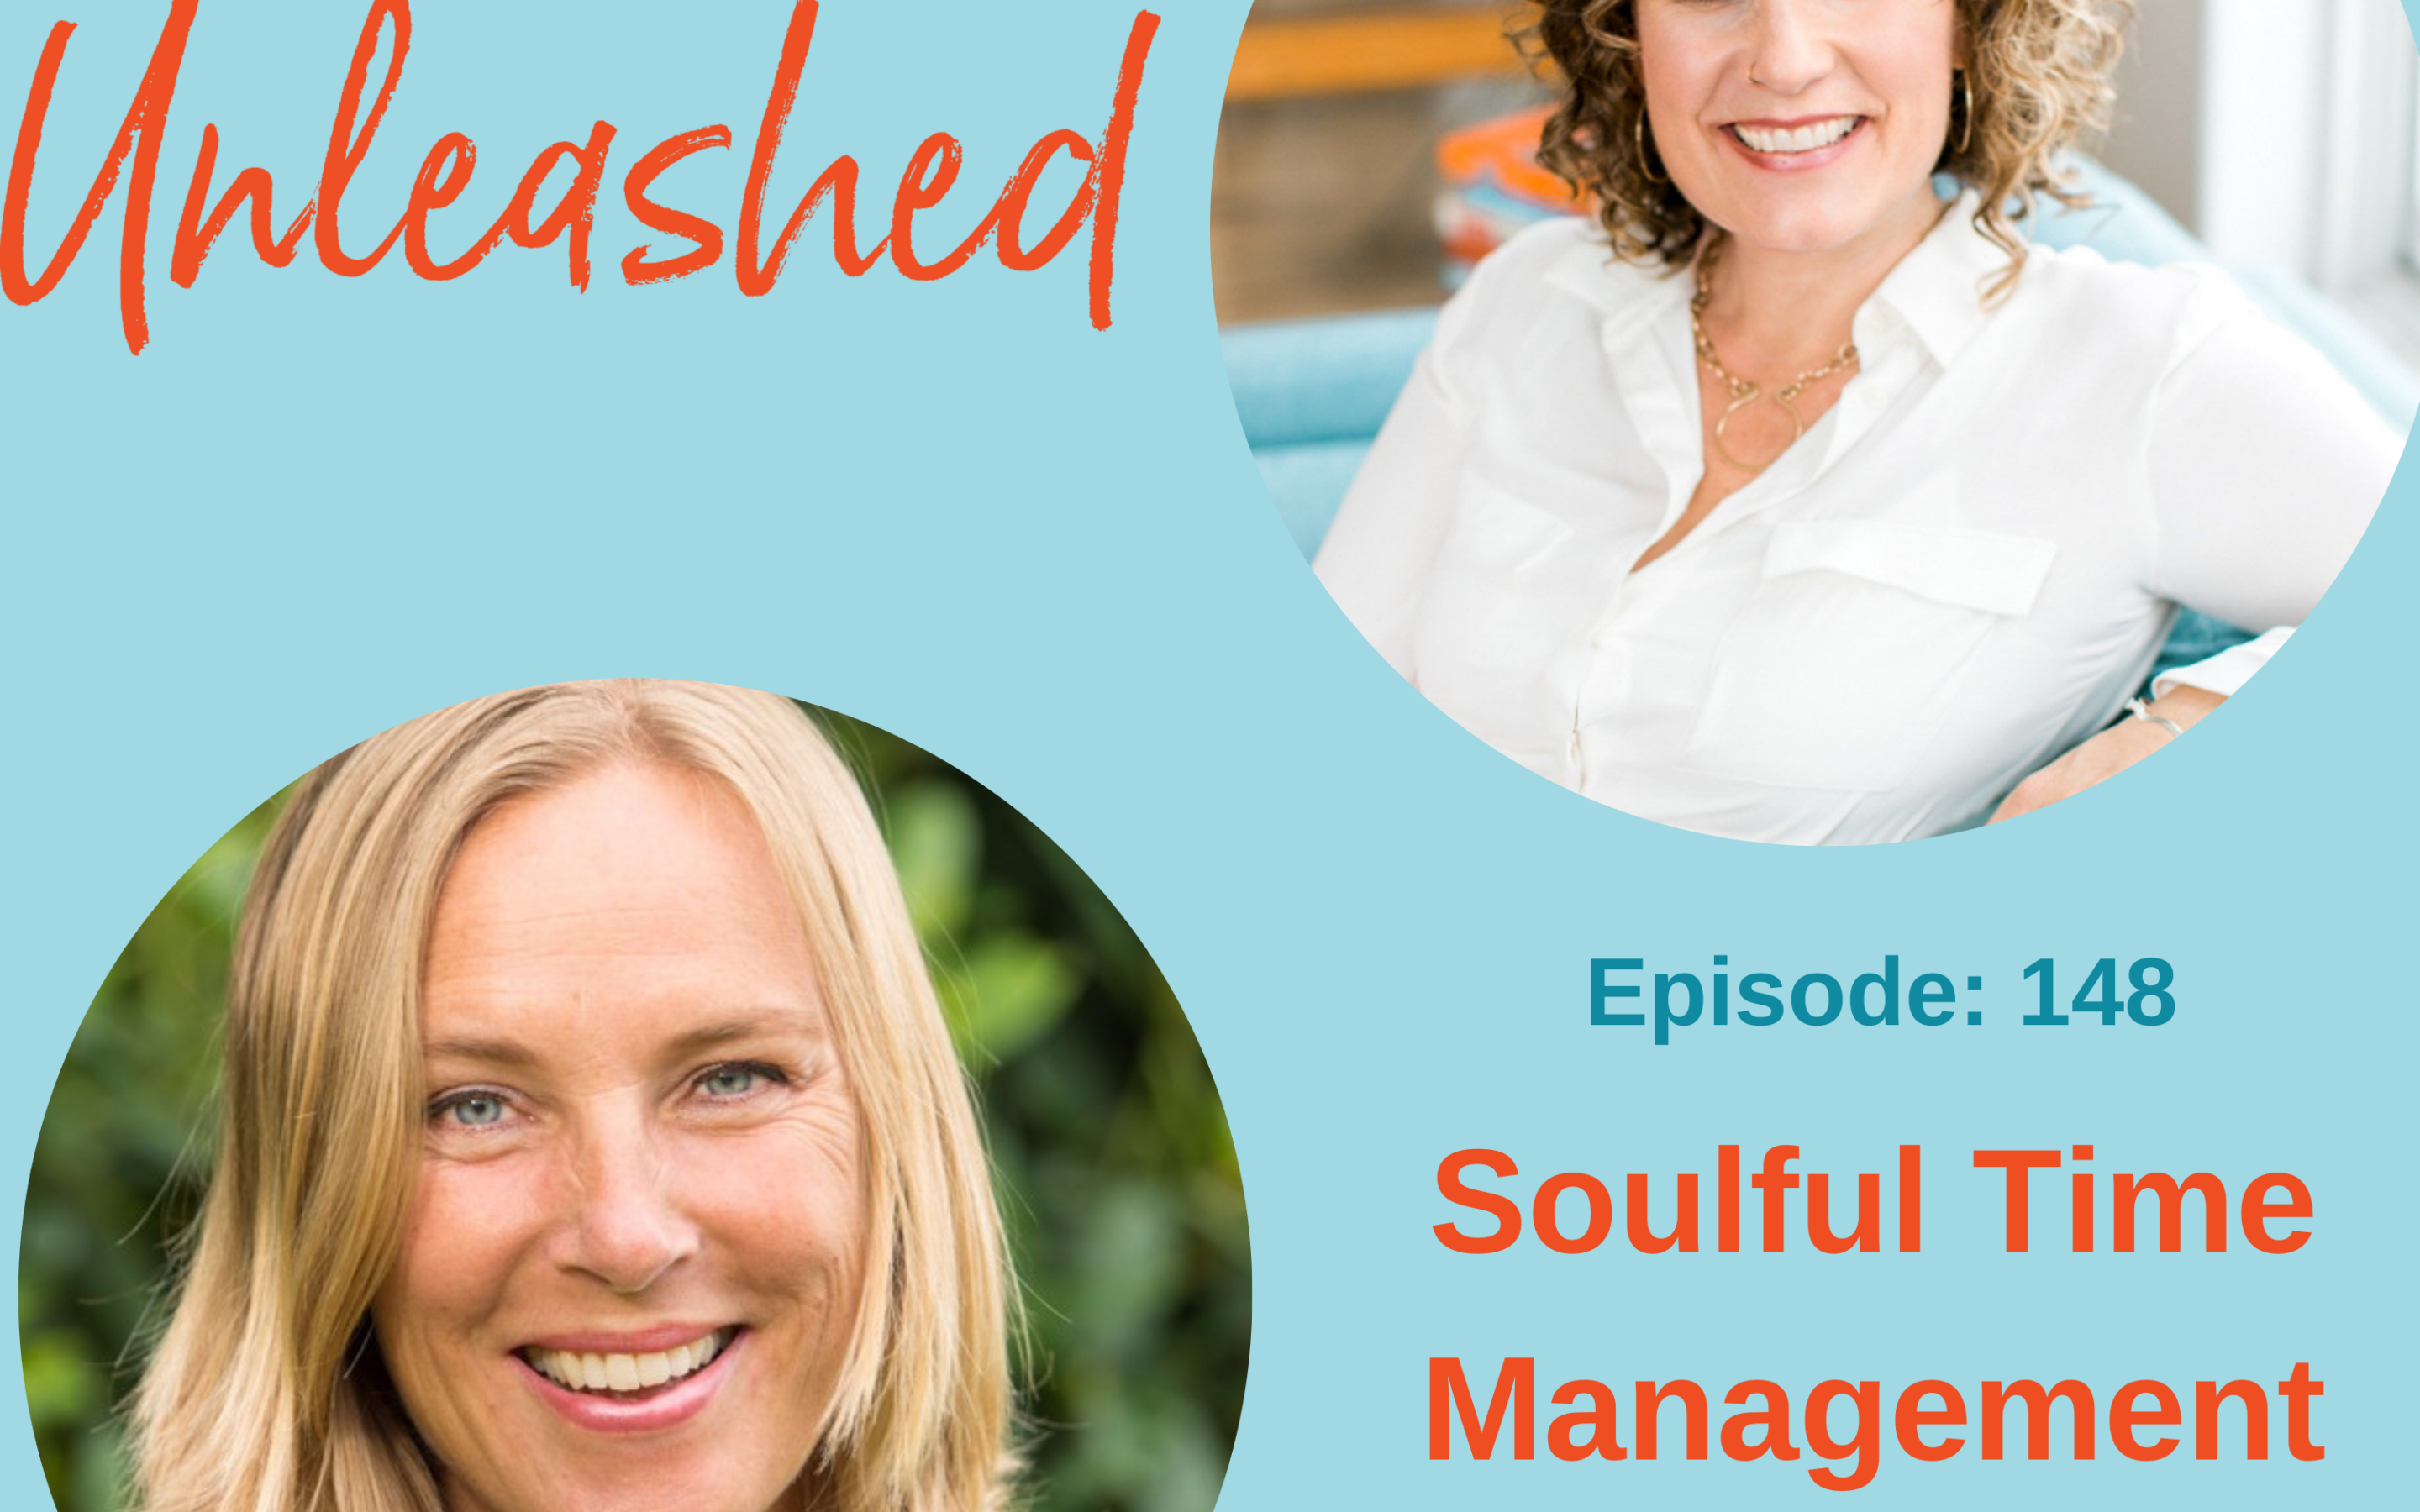 Ep #148: Soulful Time Management with Ulrika Brattemark